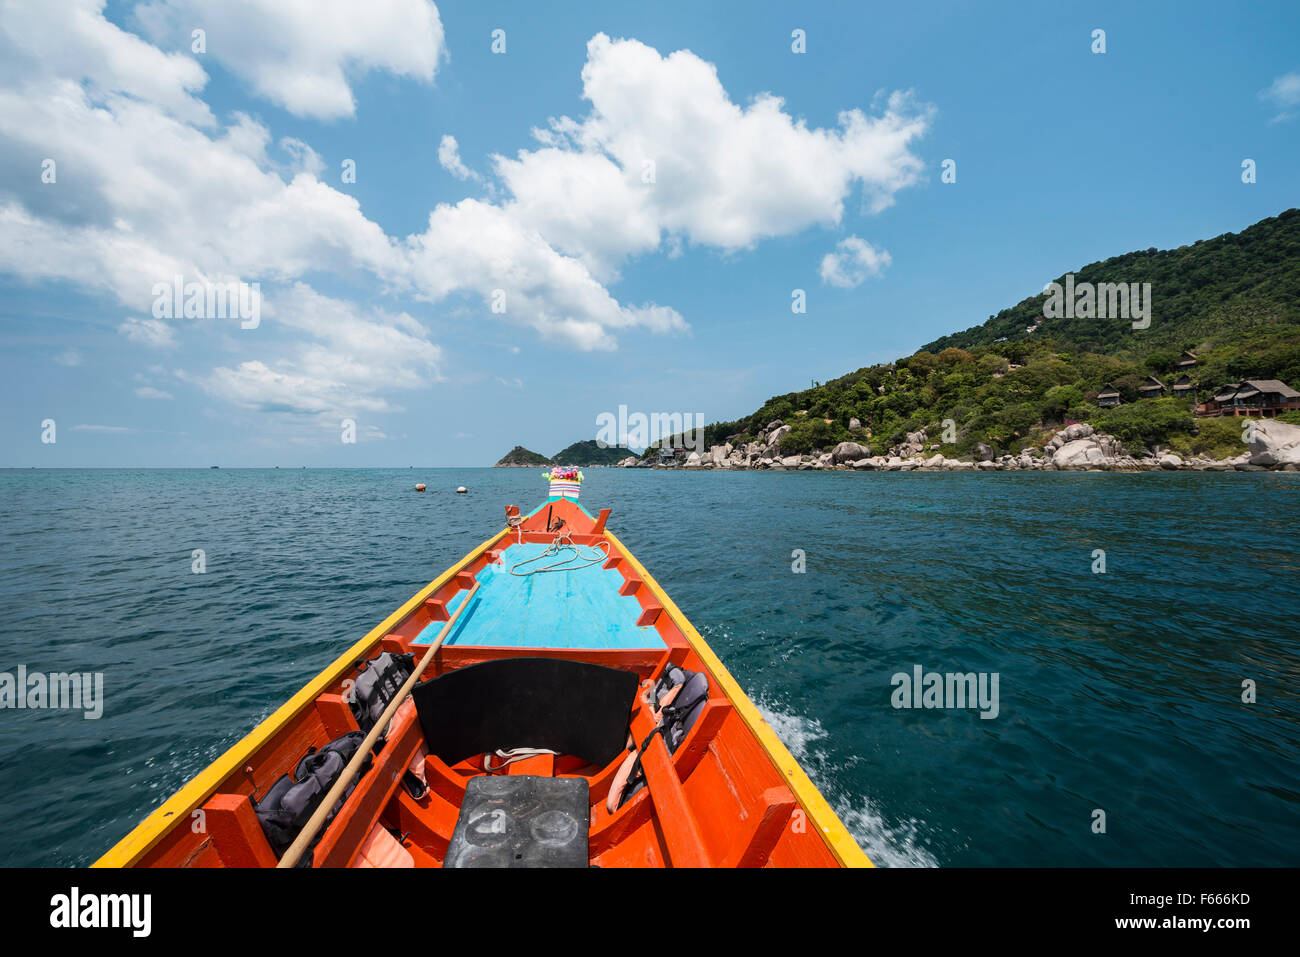 Bow of longtail boat in sea, island of Koh Tao, Gulf of Thailand, Thailand Stock Photo